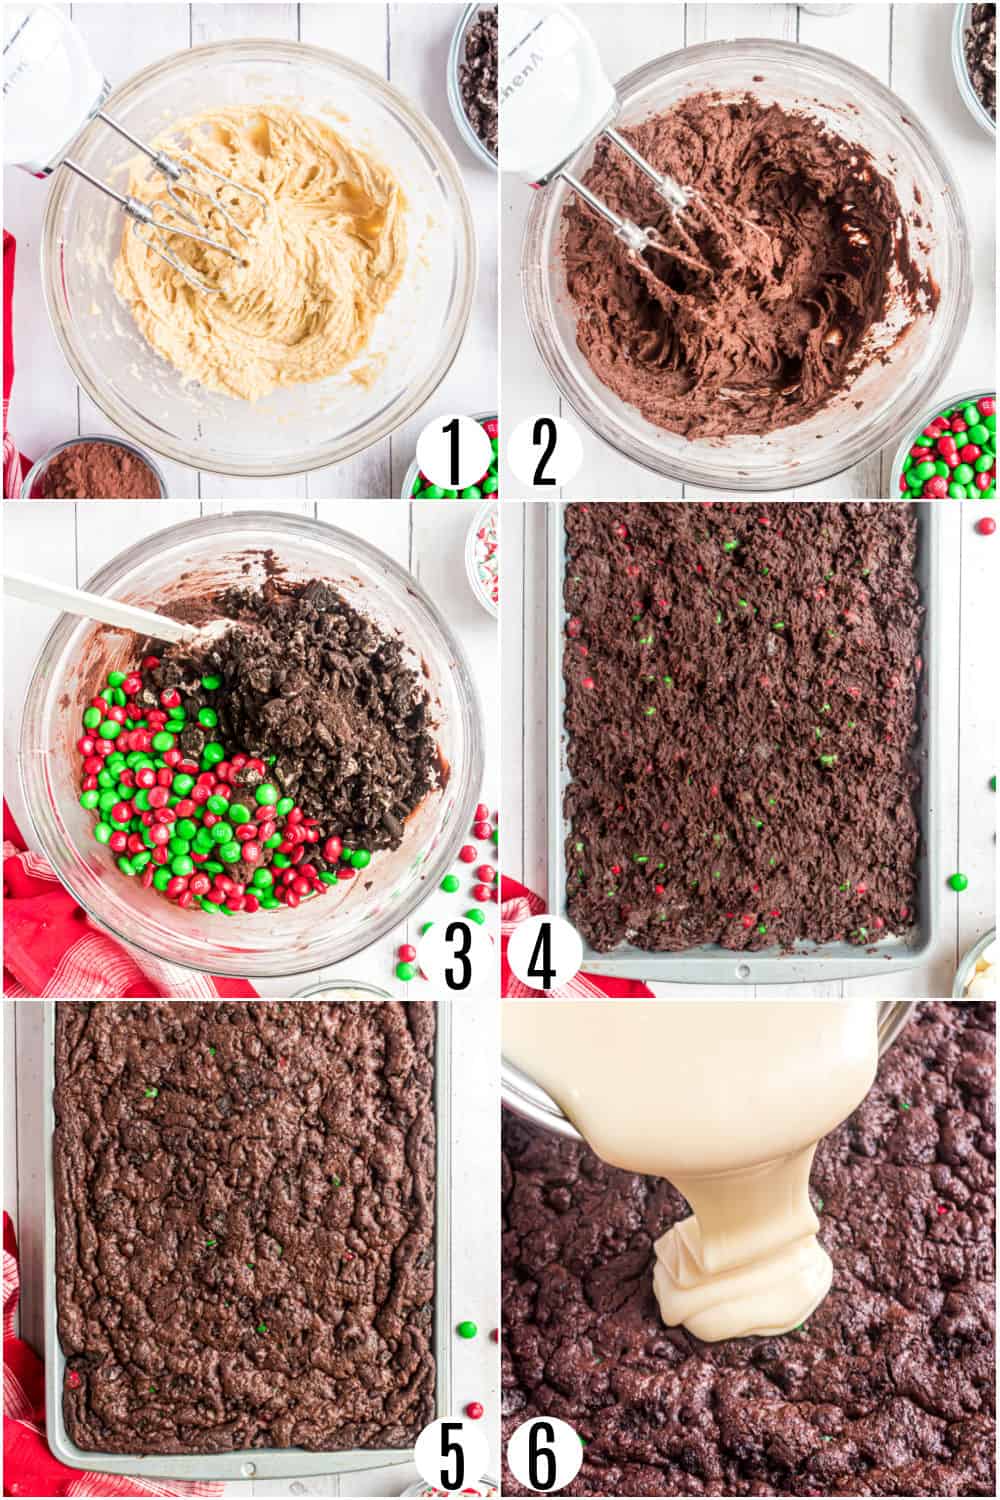 Step by step photos showing how to make candy cane cookie bars.